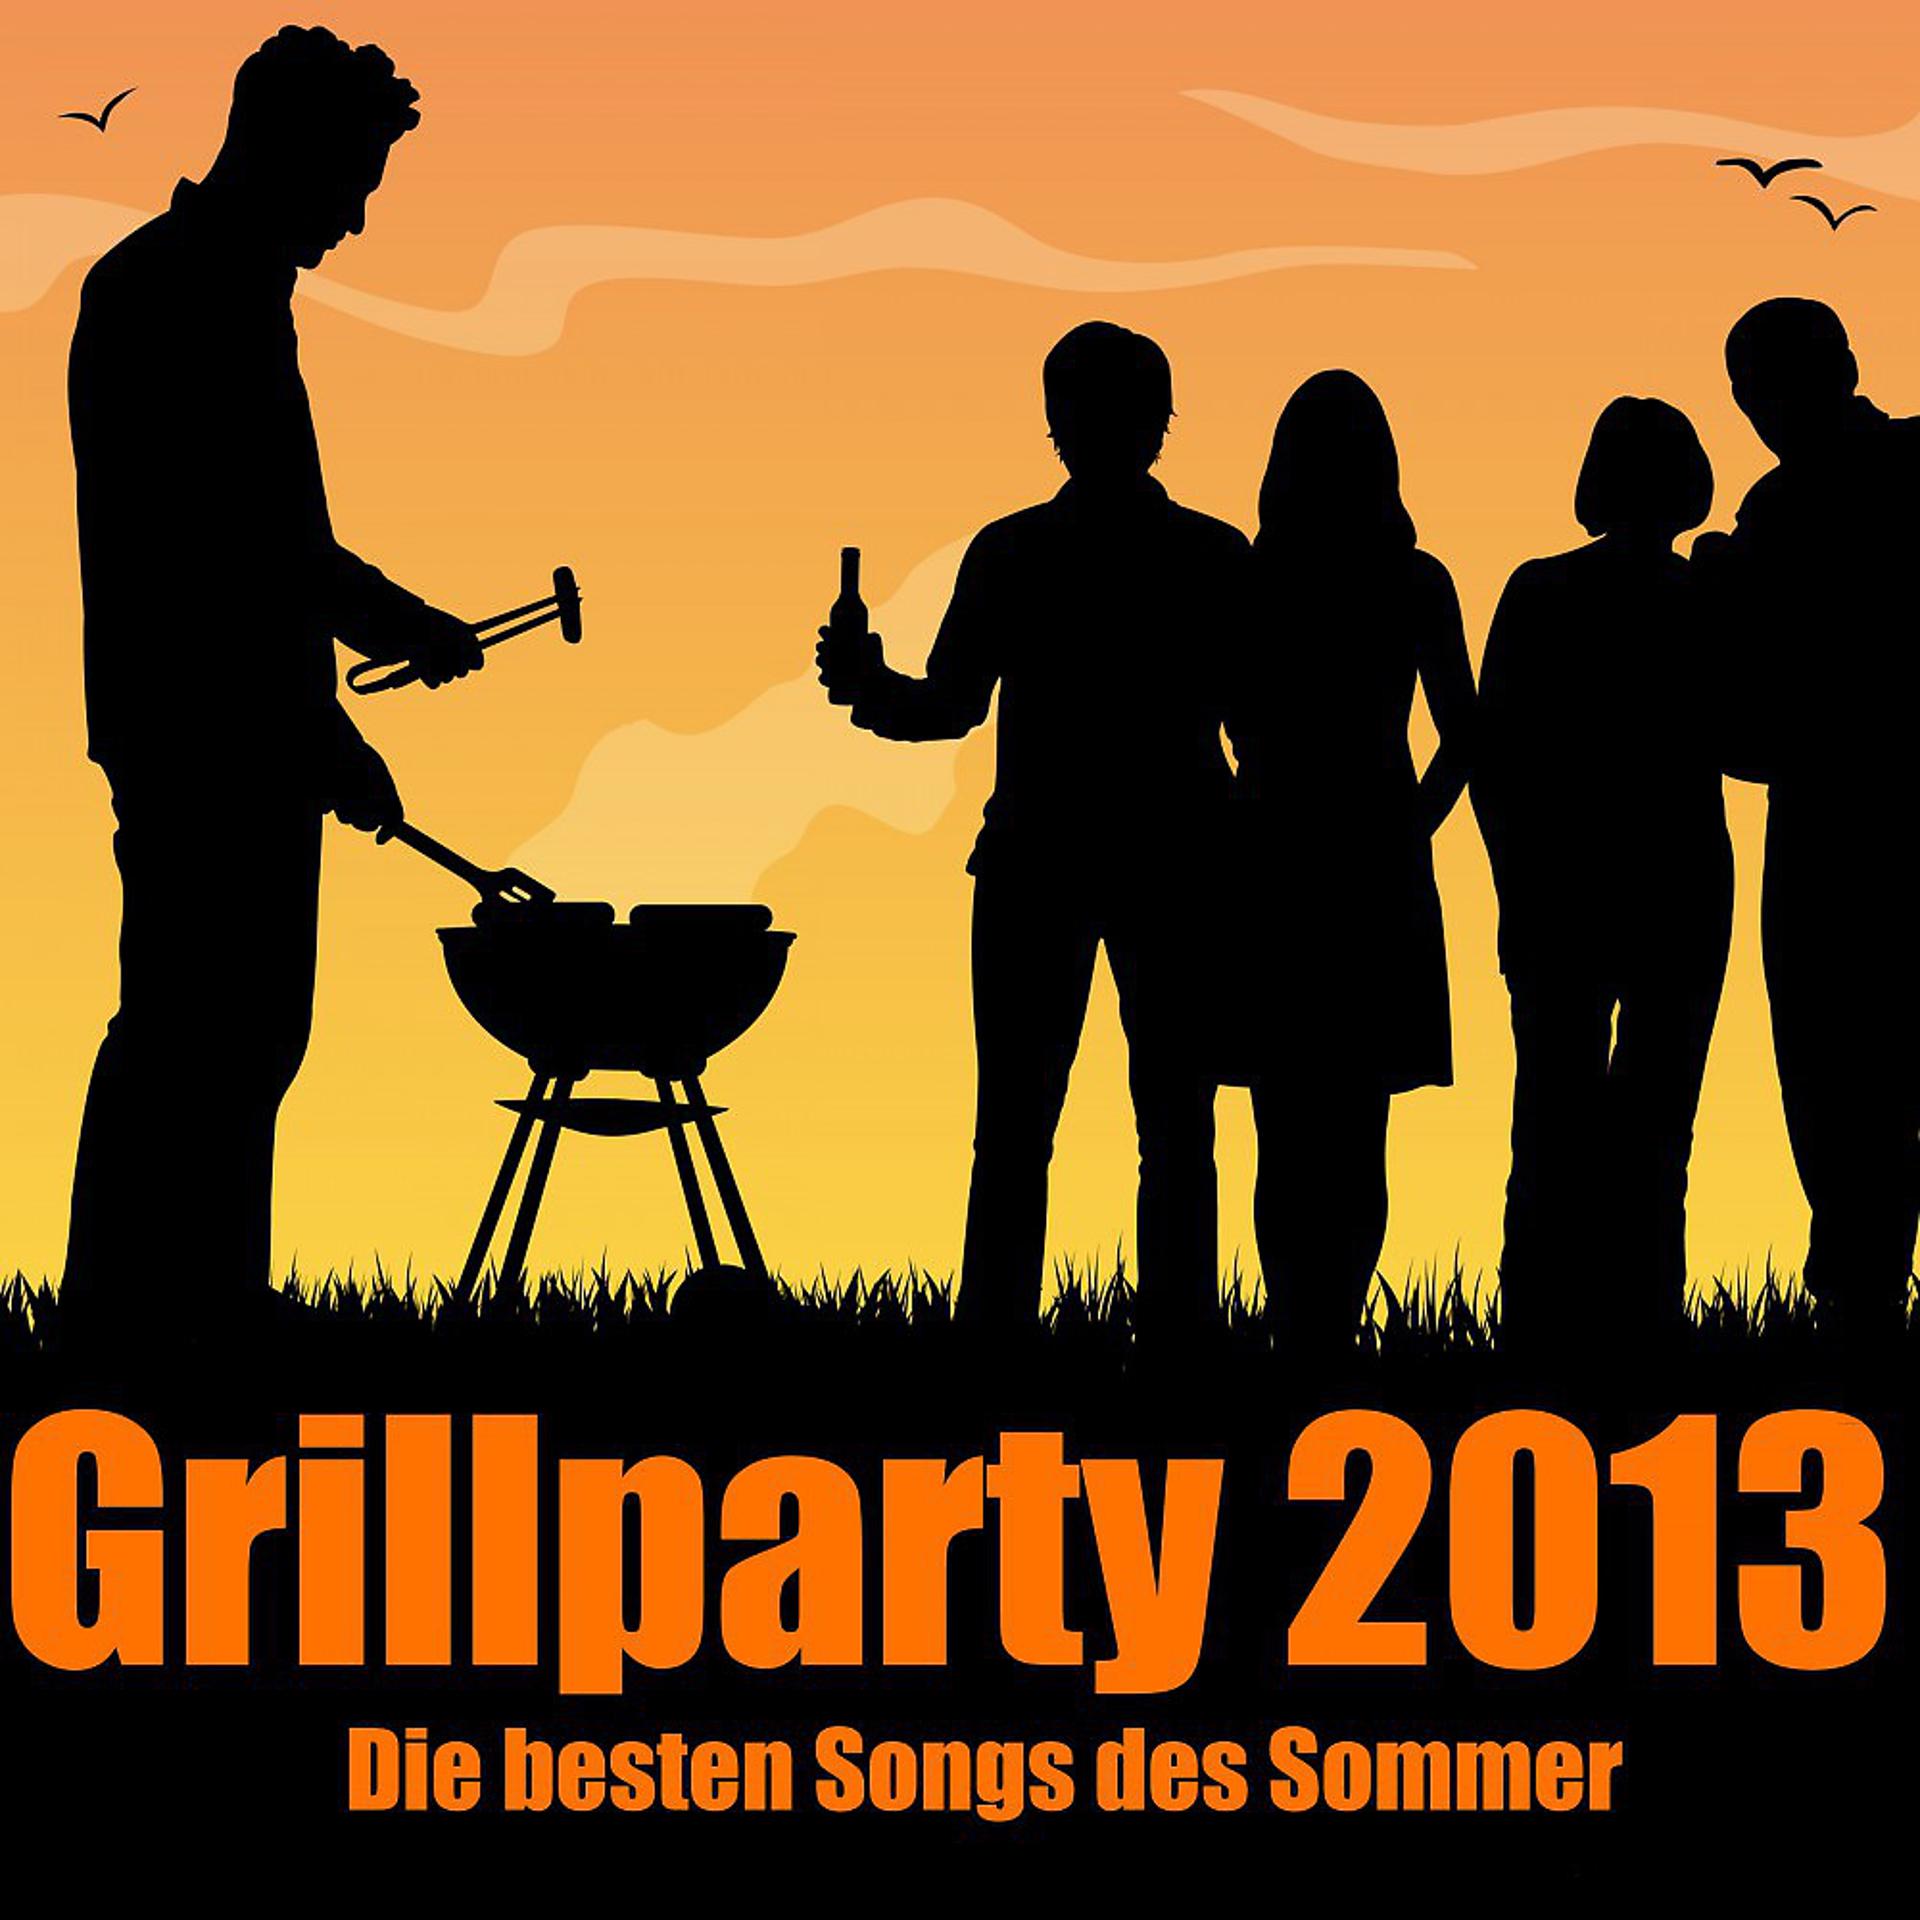 Постер альбома Grillparty 2013 - Die besten Songs des Sommers